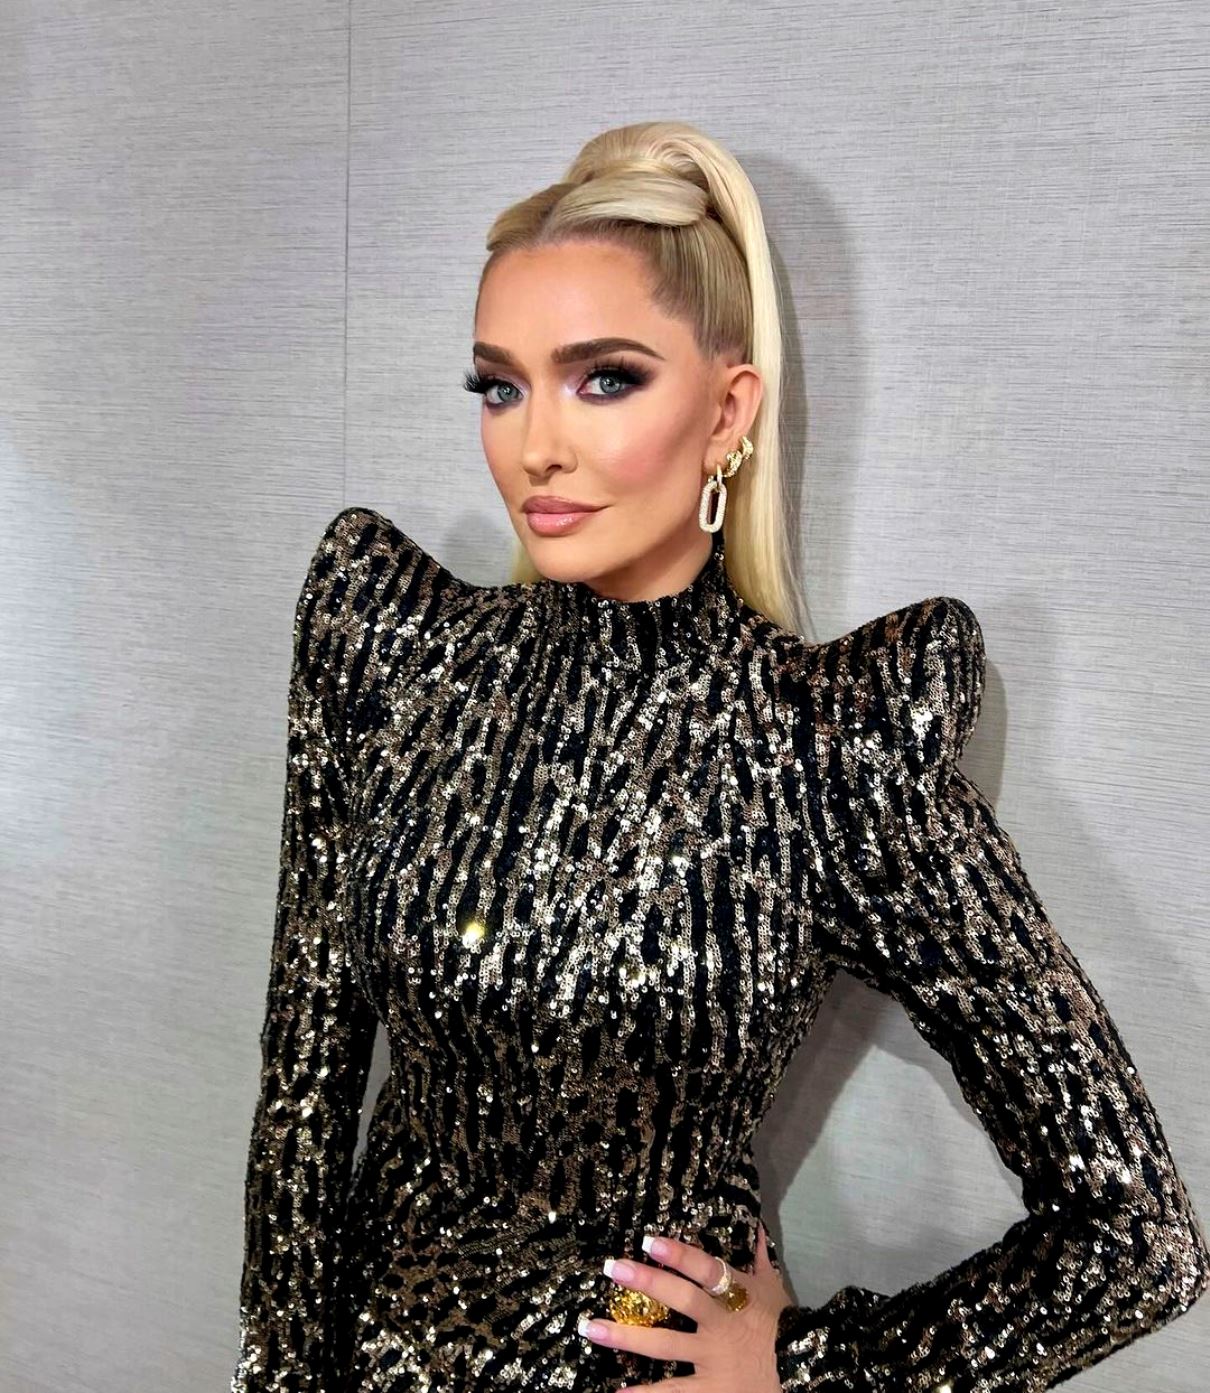 Erika Jayne Loses Court Battle and Faces Trial After Judge Denies Motion to Dismiss $18 Million Lawsuit From Costume Designer, Details Revealed & RHOBH Live Viewing Thread